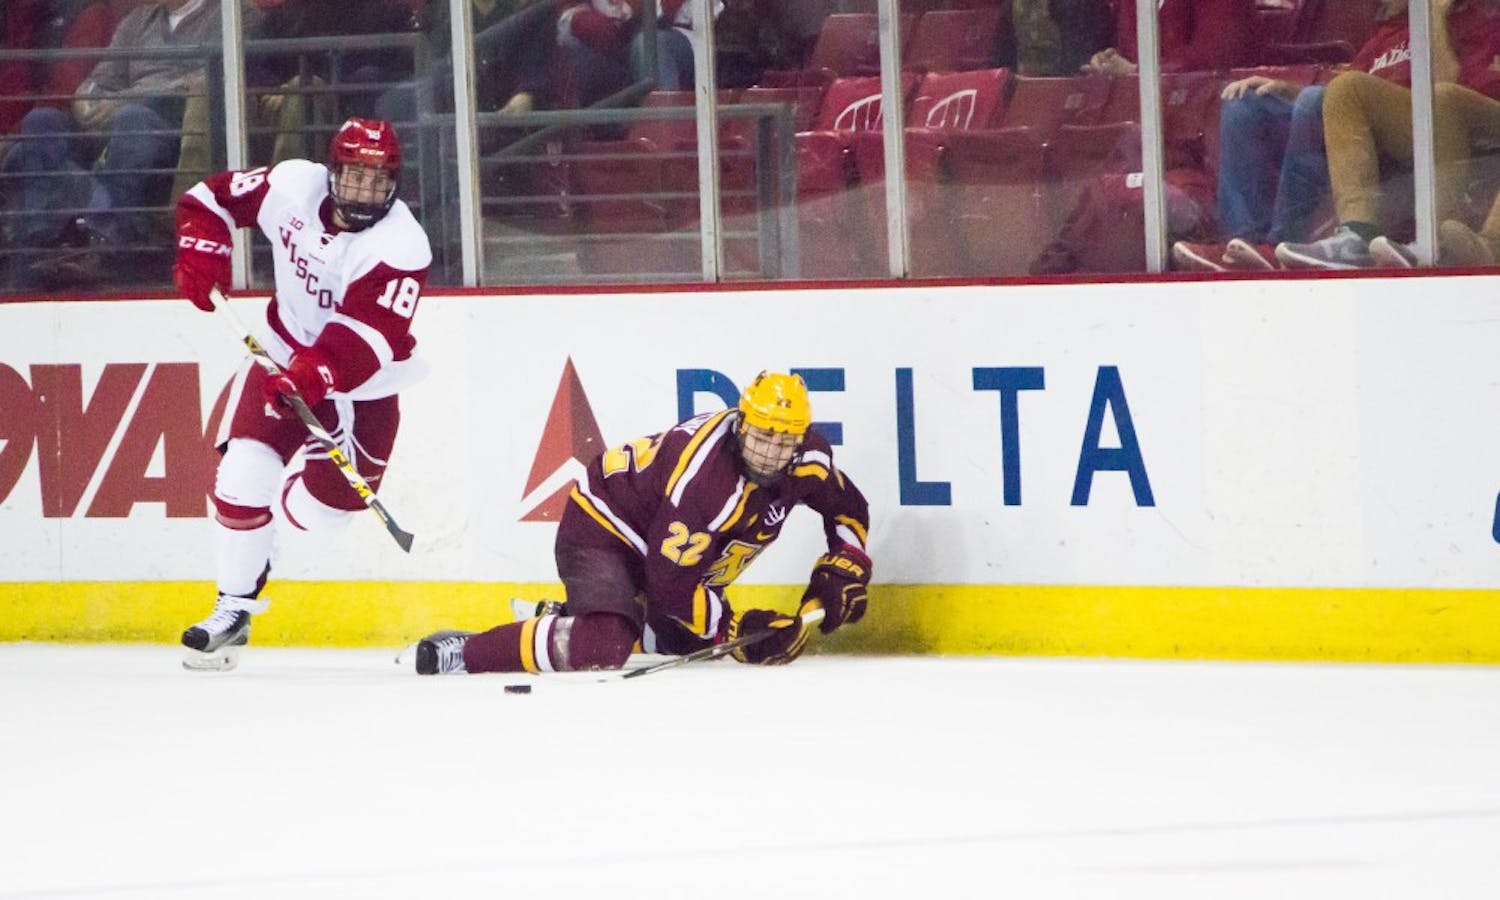 Seamus Malone helped the Badgers earn a win on Saturday after a lackluster loss on Friday.